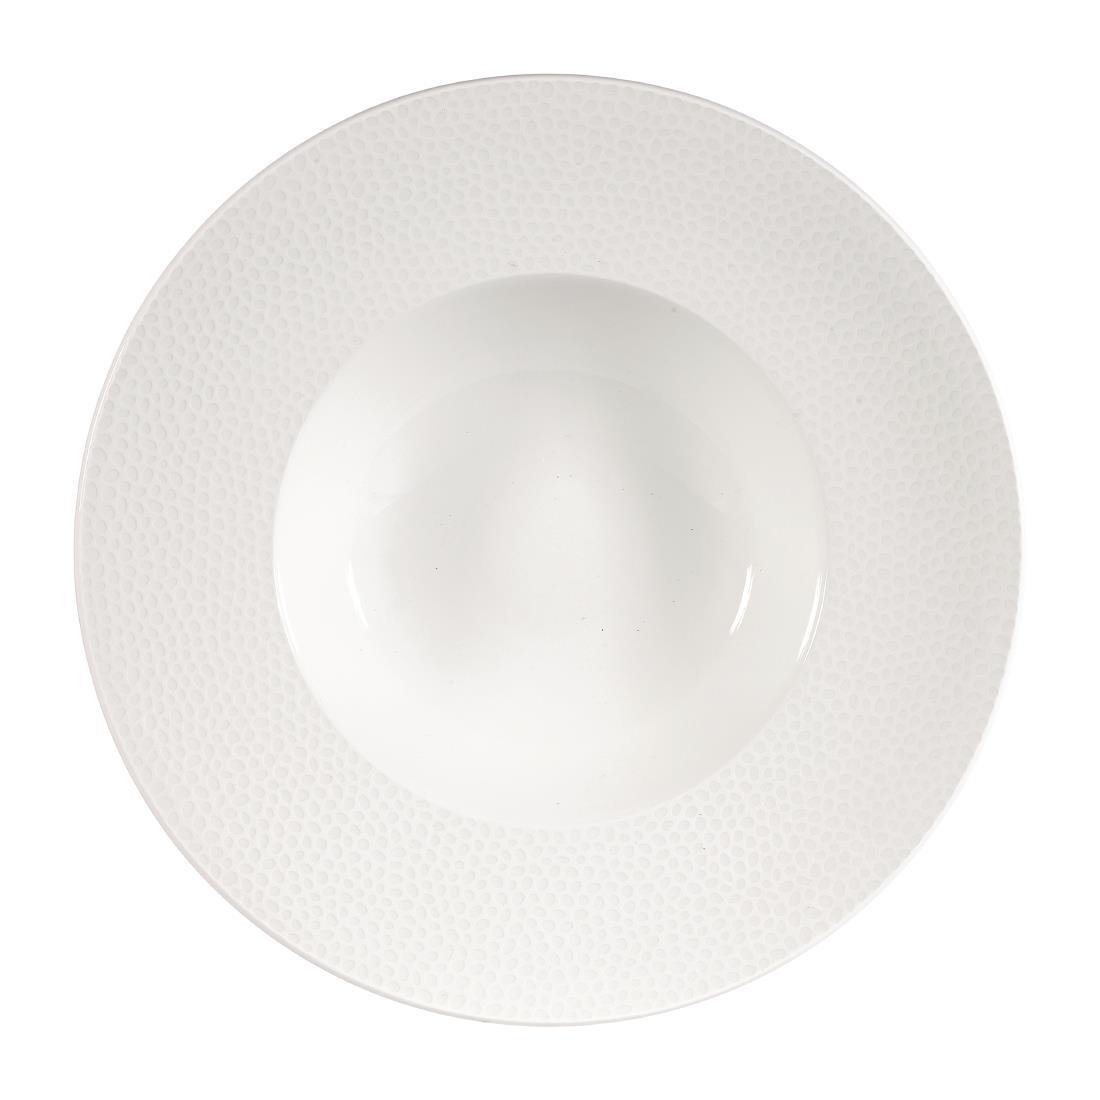 Churchill Isla Wide Rim Bowl White 240mm (Pack of 12) - DY838  - 1